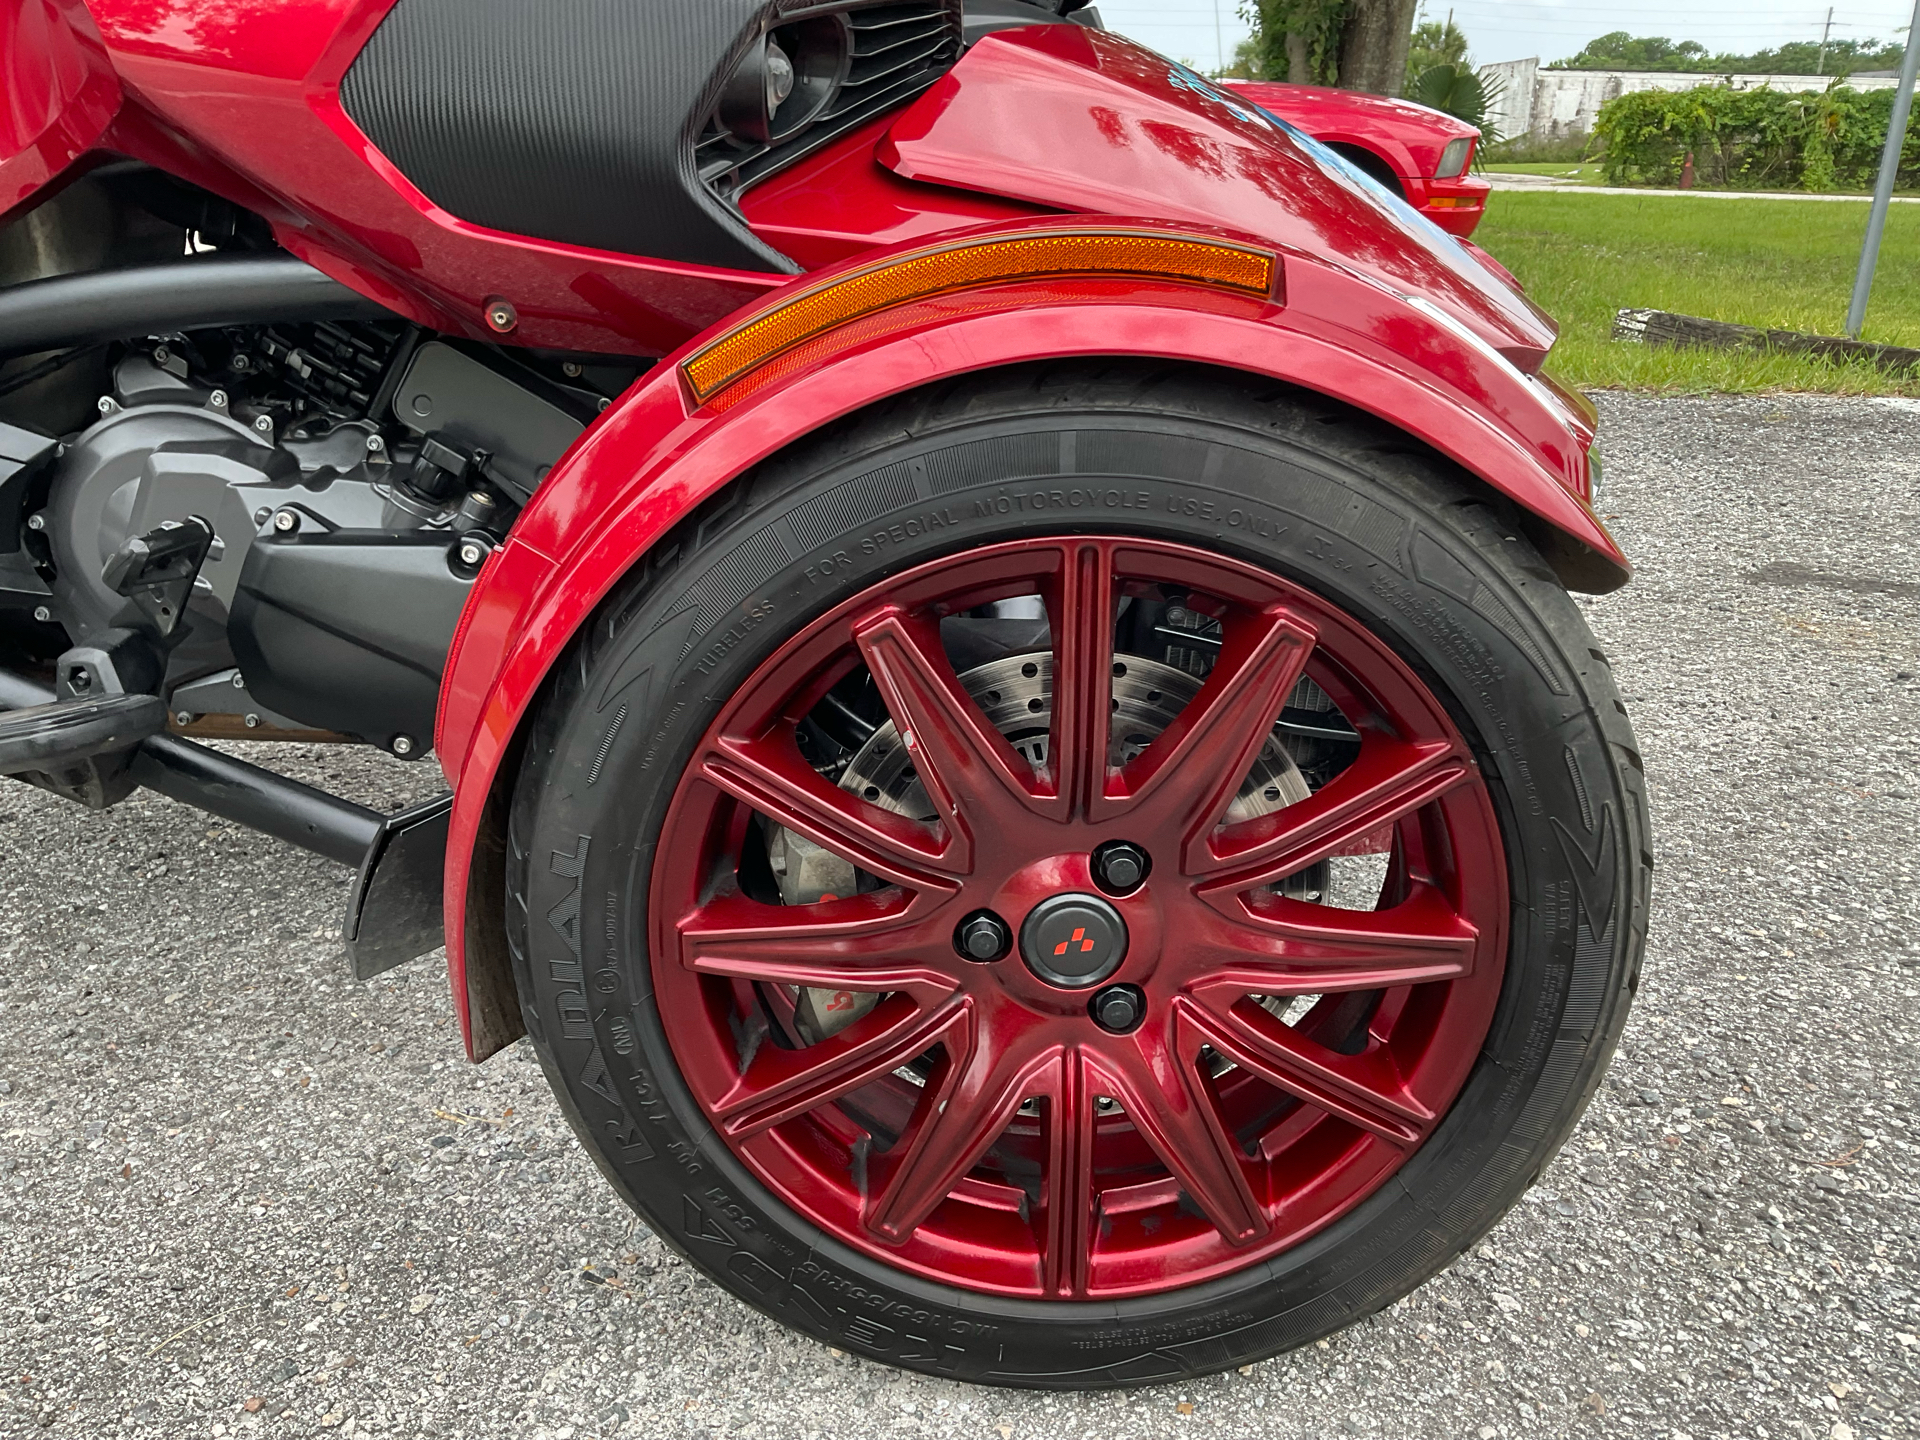 2017 Can-Am Spyder F3 Limited in Sanford, Florida - Photo 14